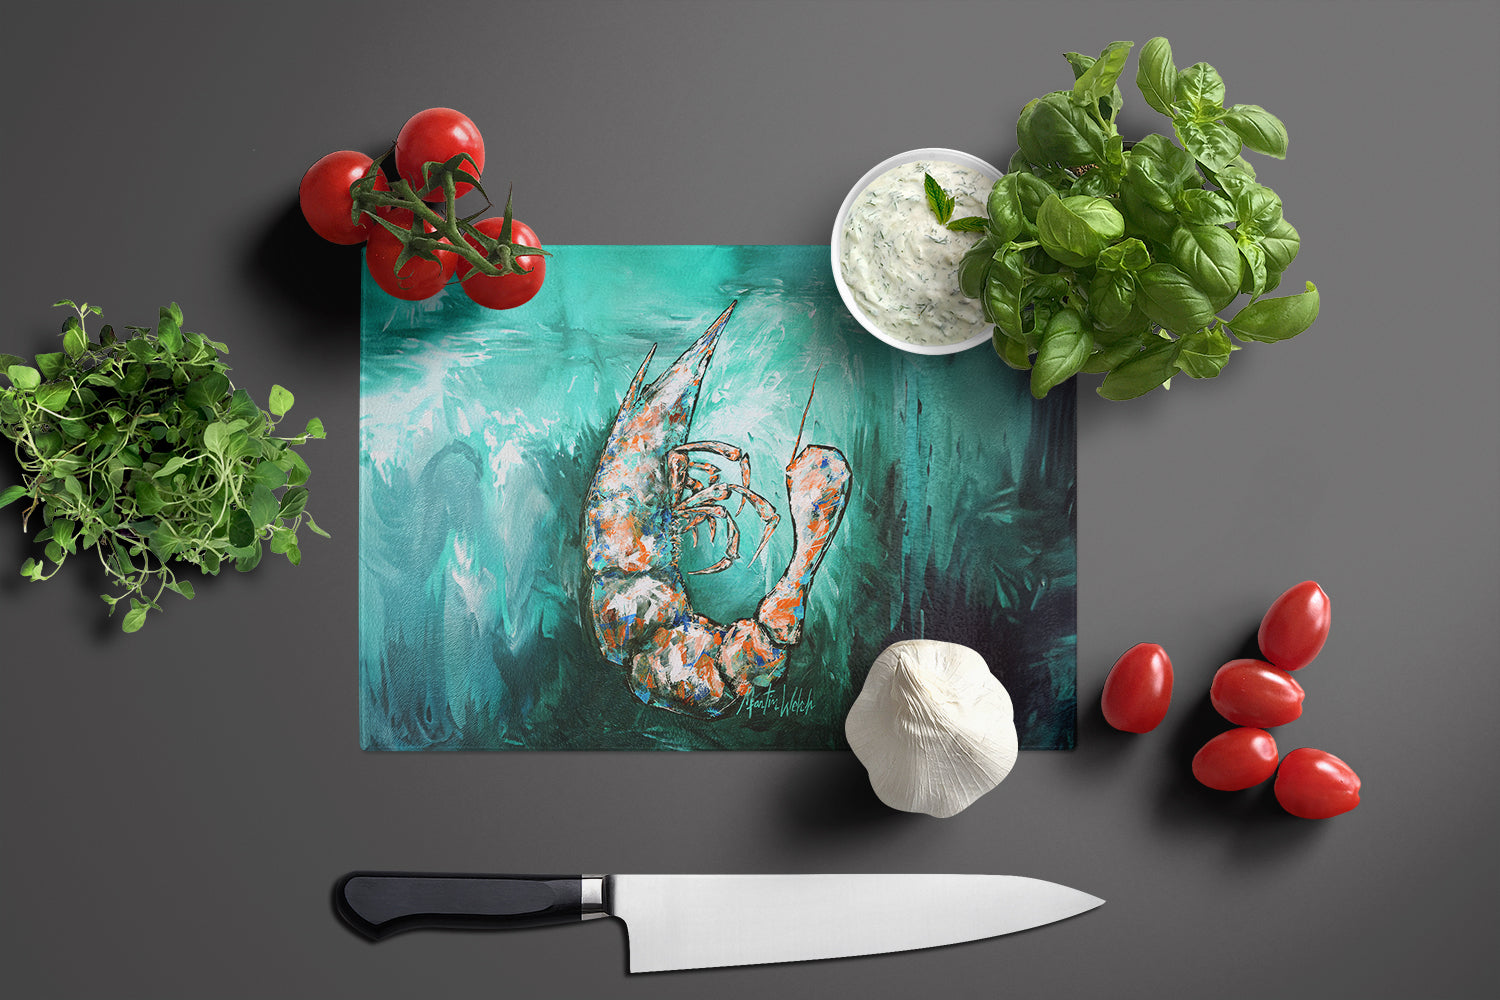 A Touch of Blue Shrimp Glass Cutting Board